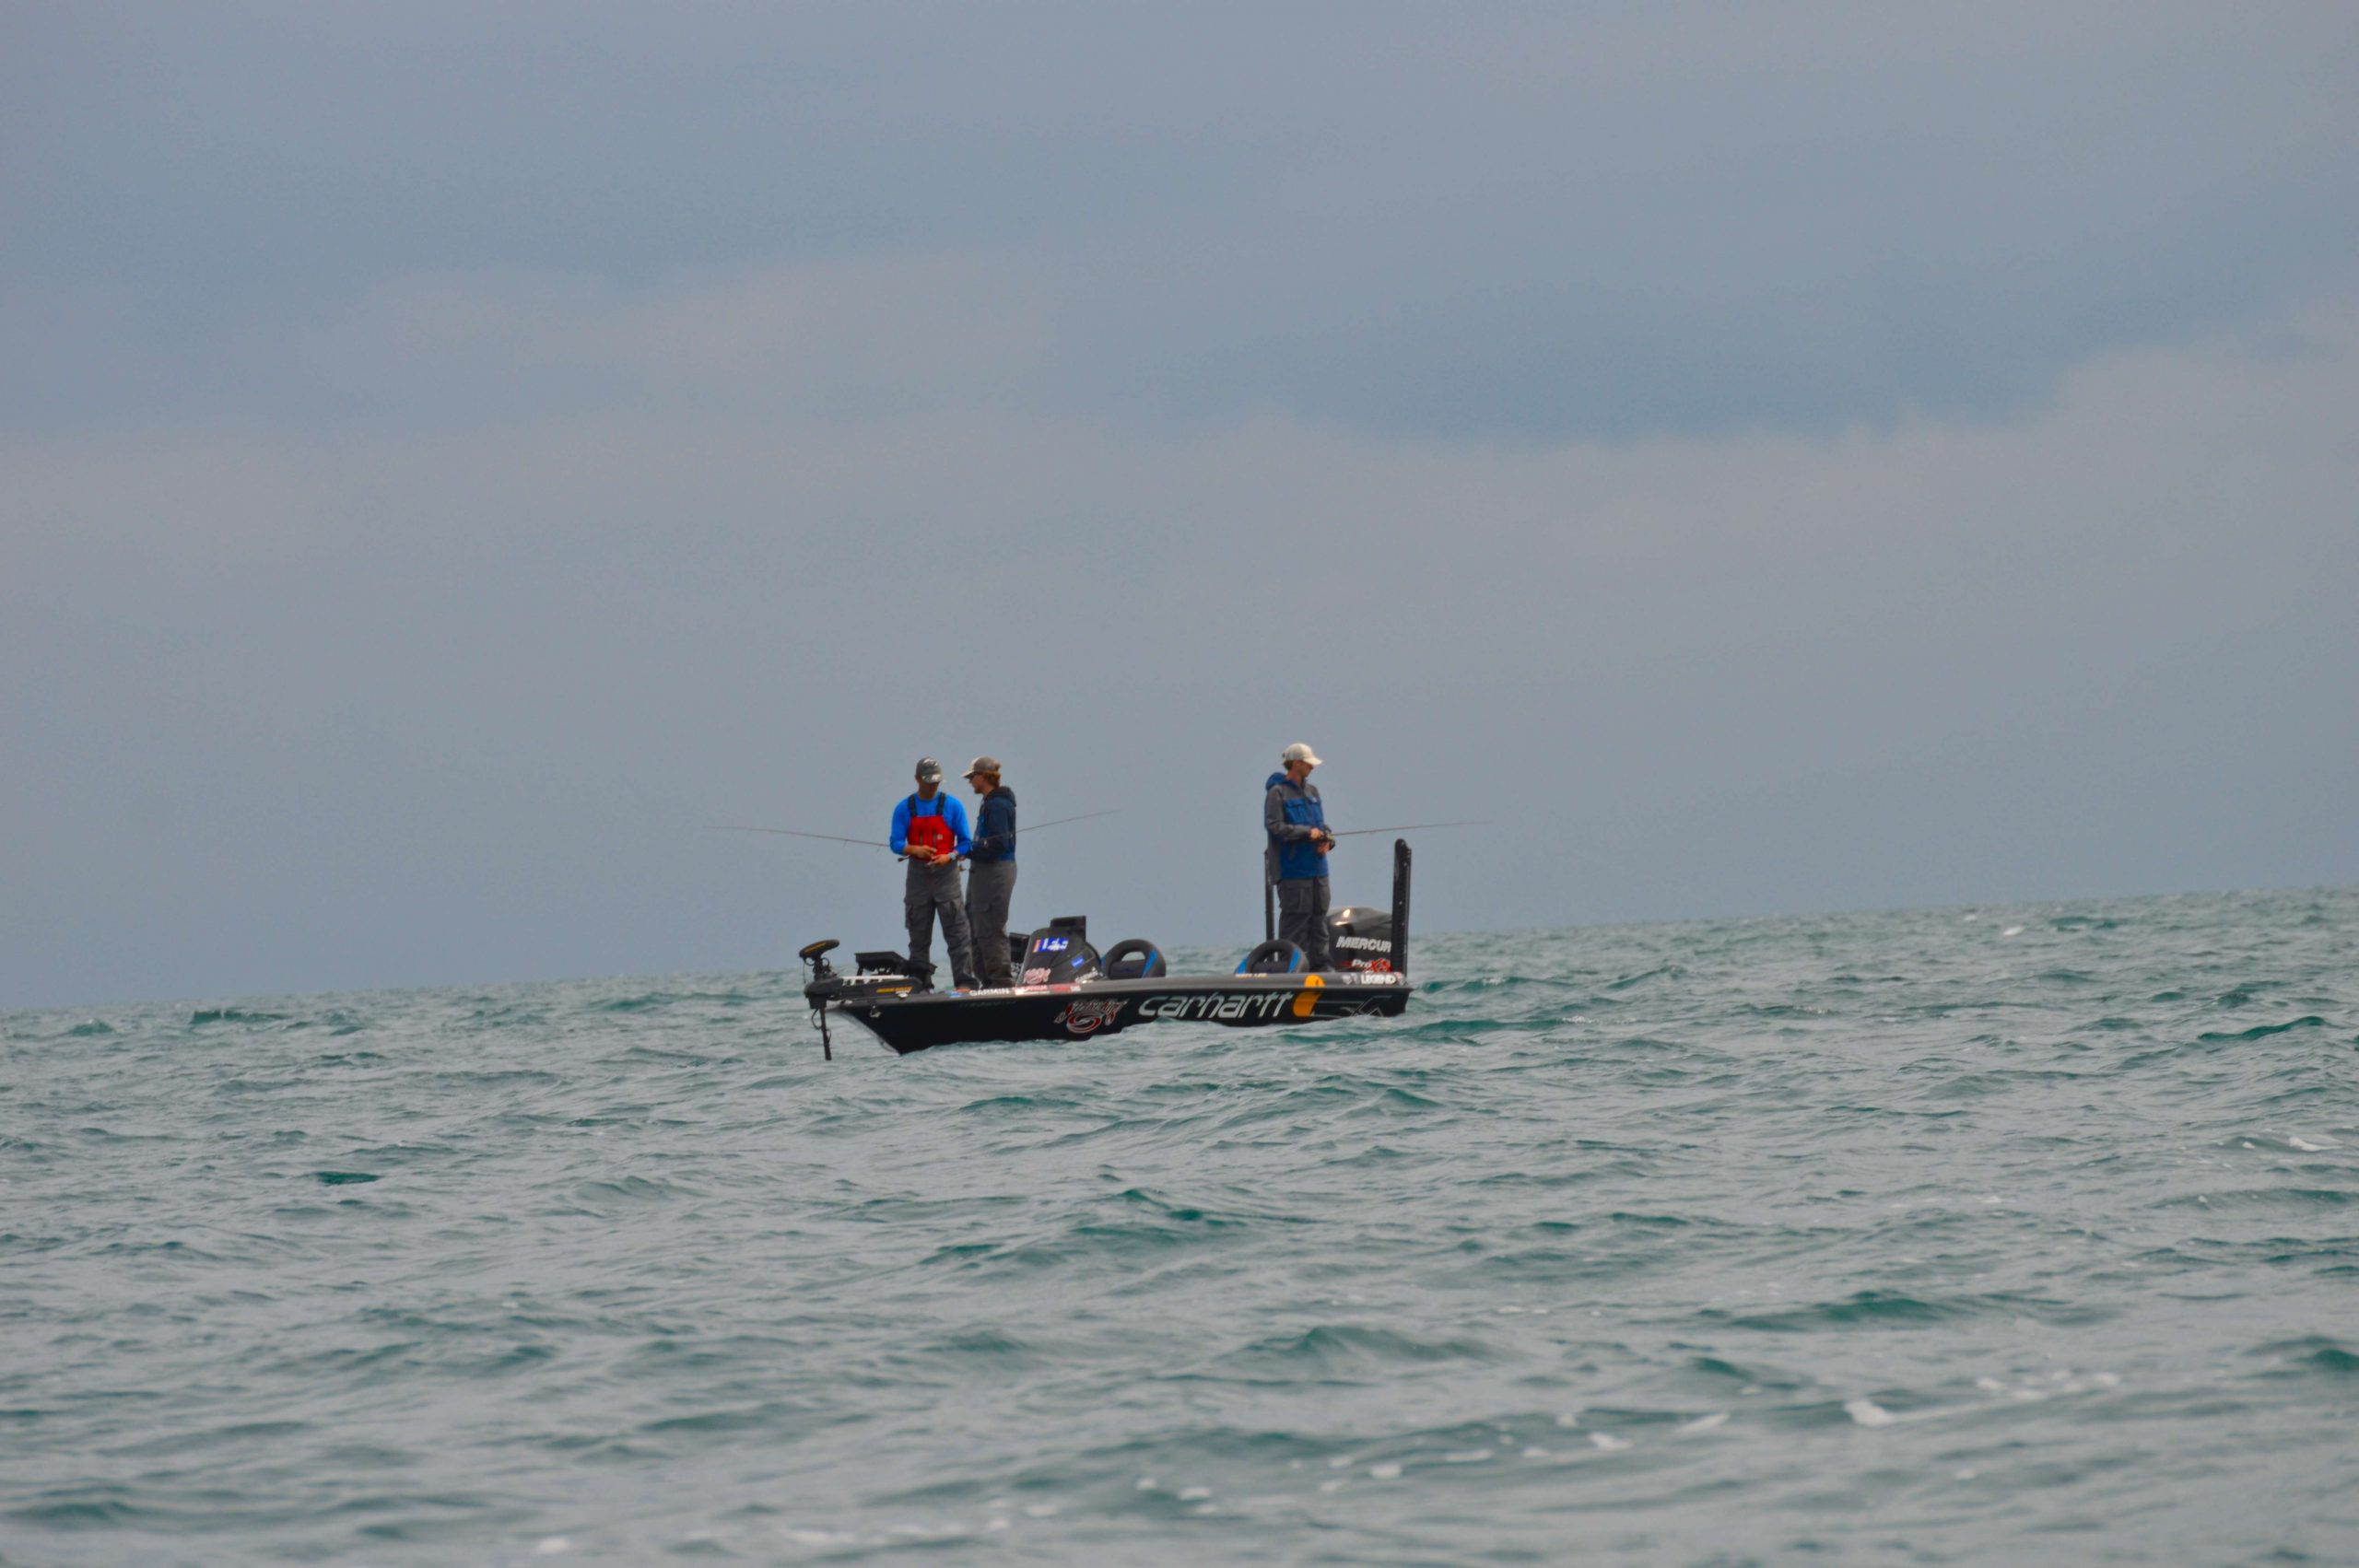 The waves were a little bigger today and as the college anglers put it, âGave them the full St. Clair treatment,â as they drove to Mattâs starting spot.
